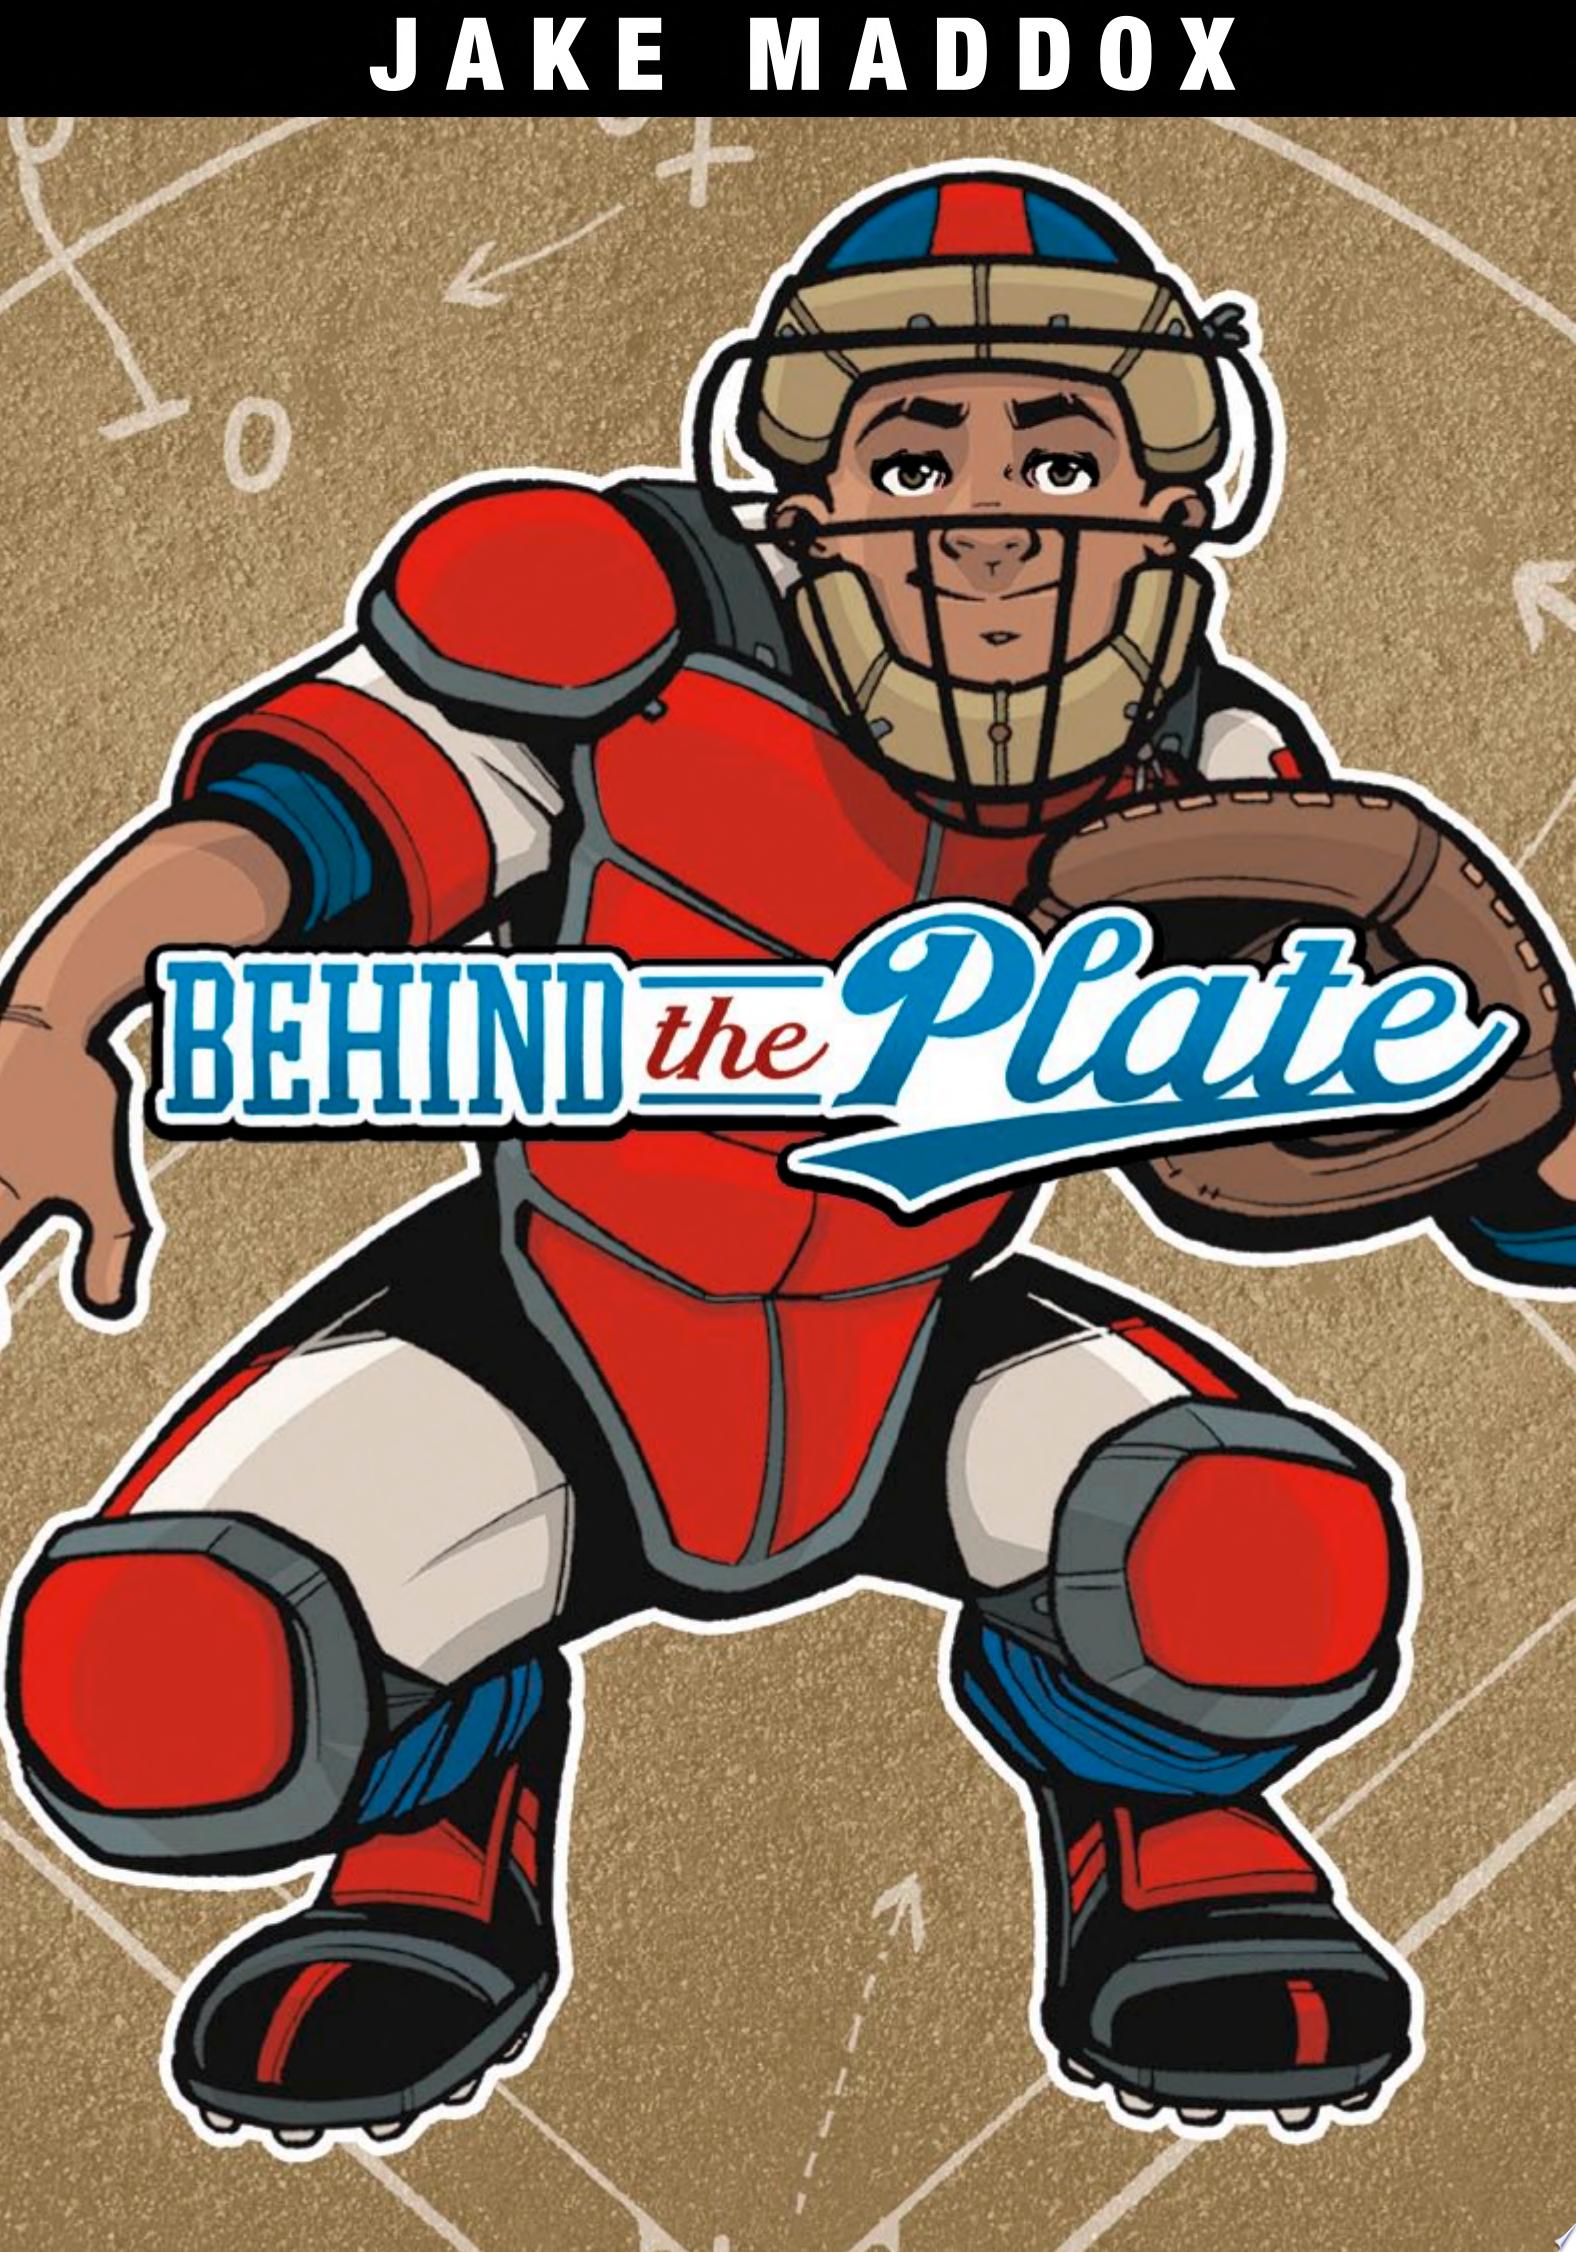 Image for "Jake Maddox: Behind the Plate"